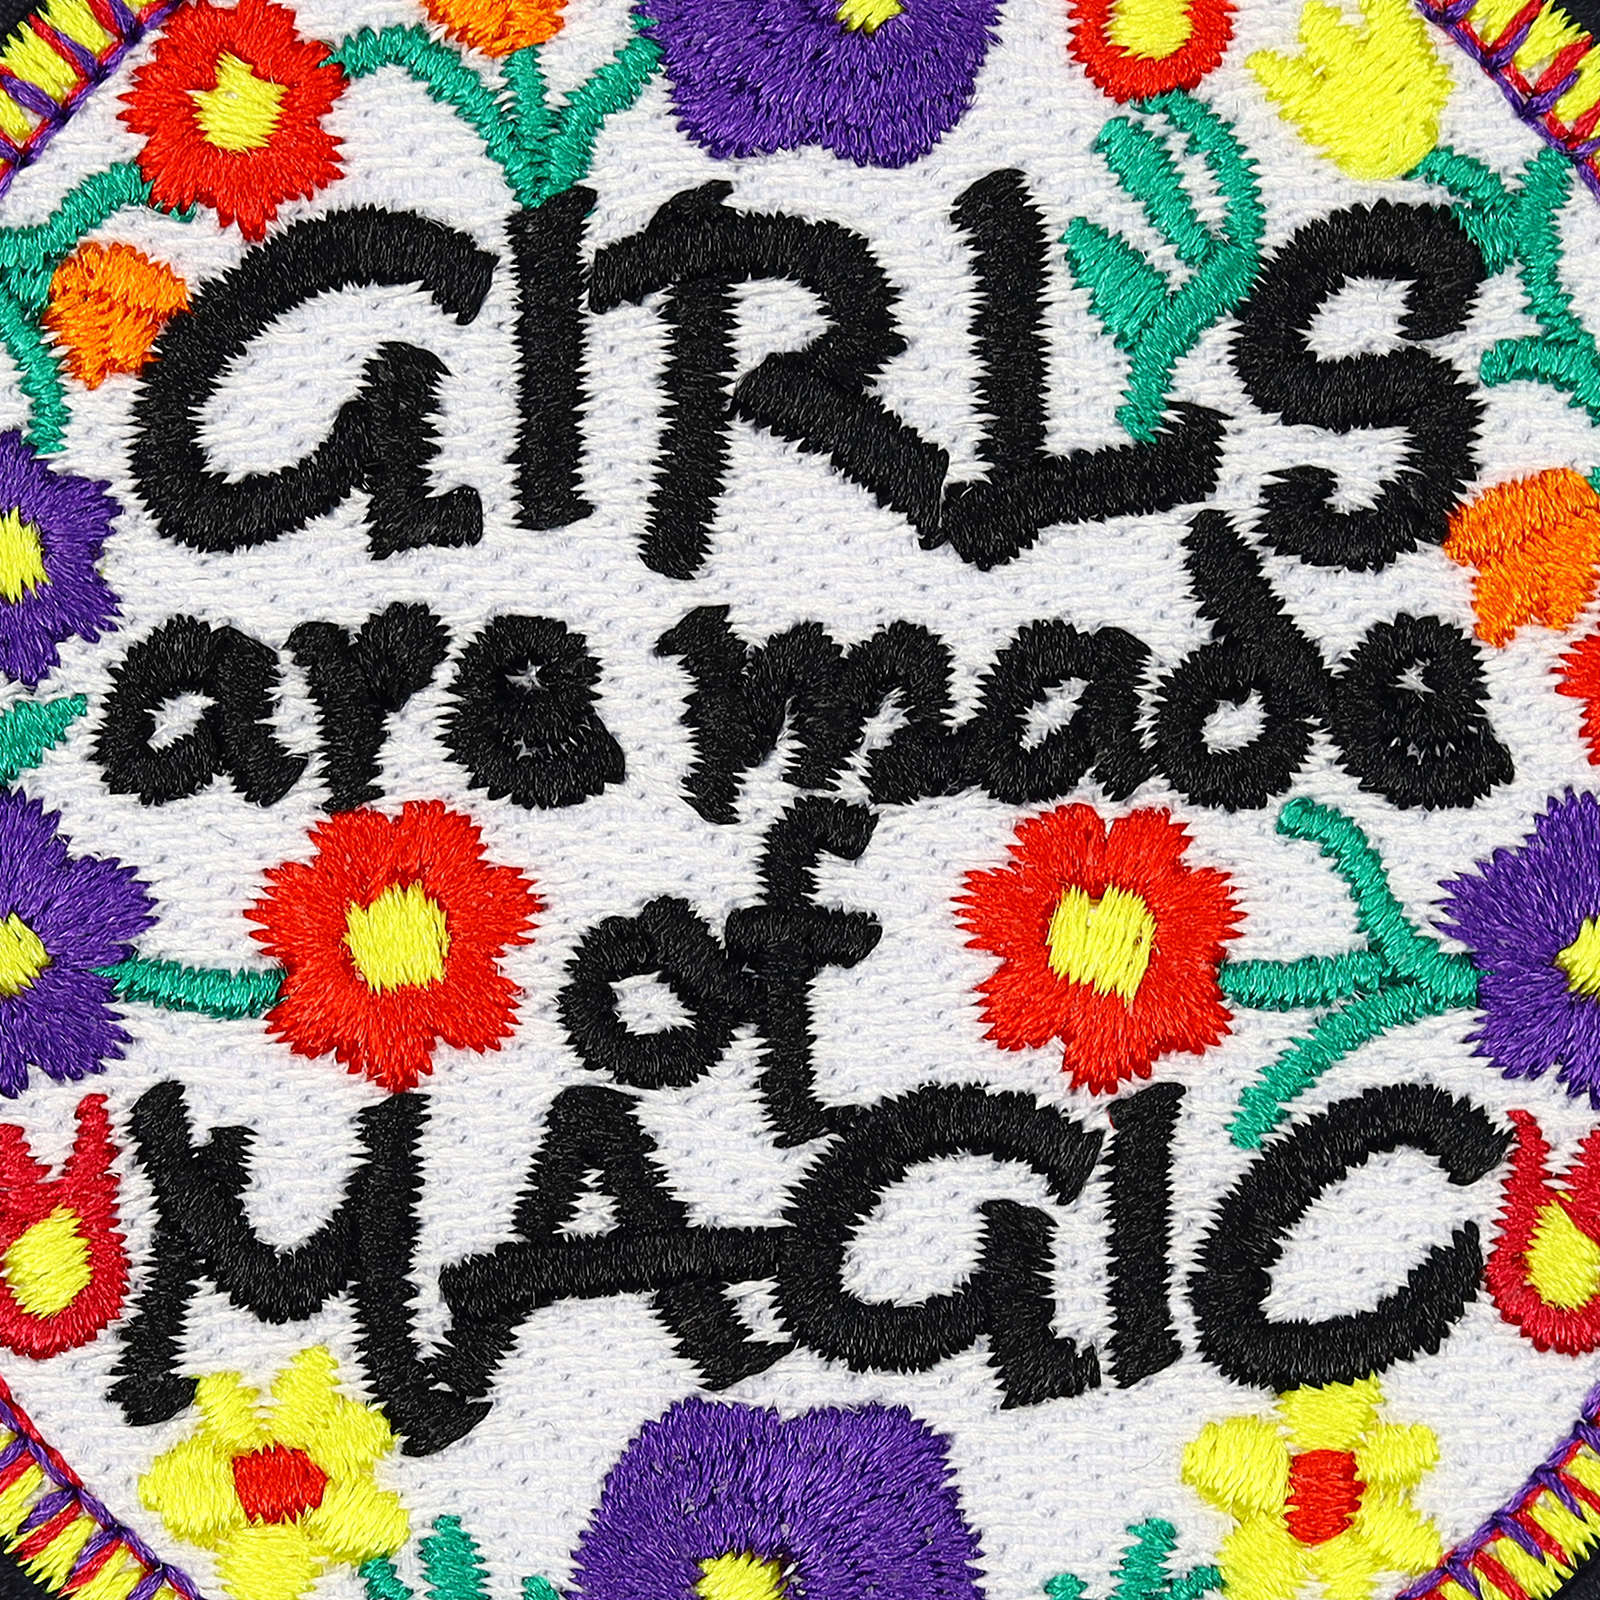 Girls are made of magic - Patch